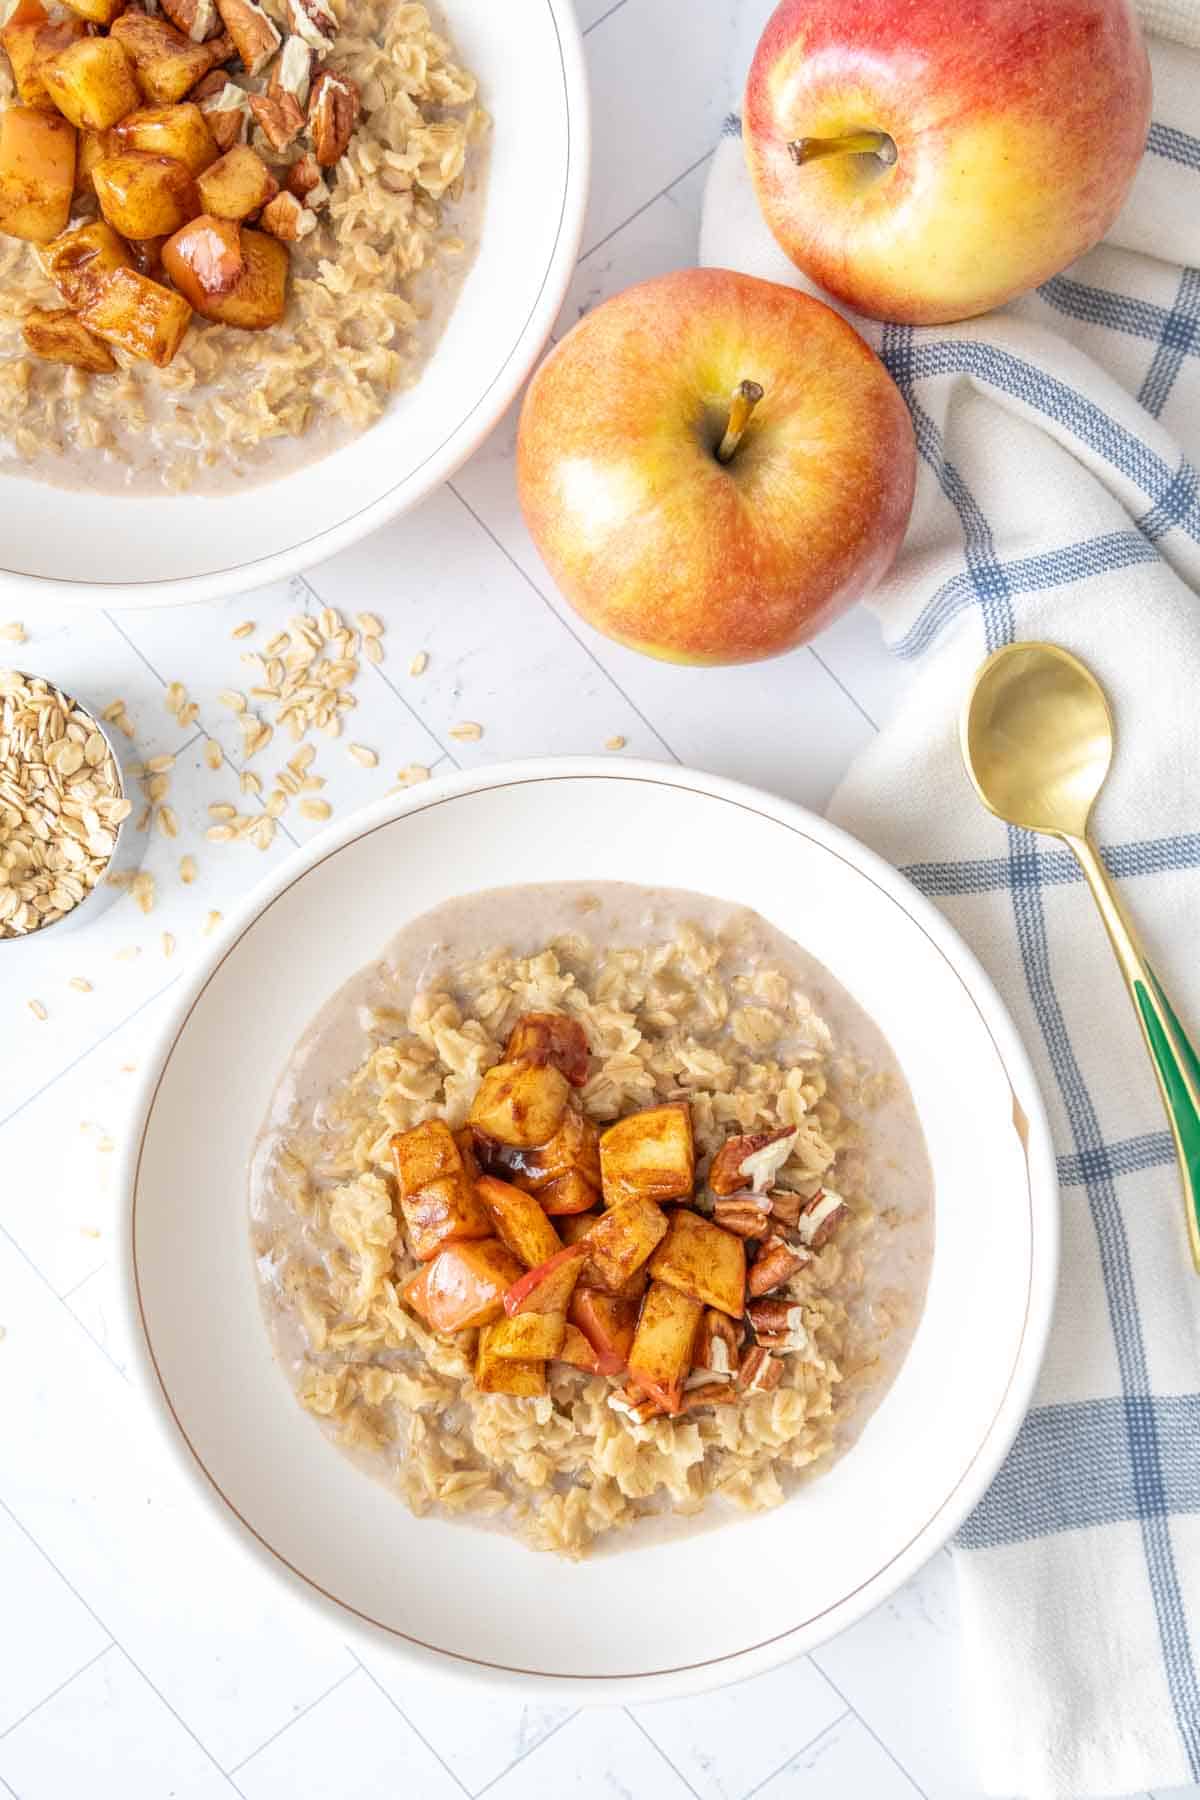 Two bowls of oatmeal with apples and oats.